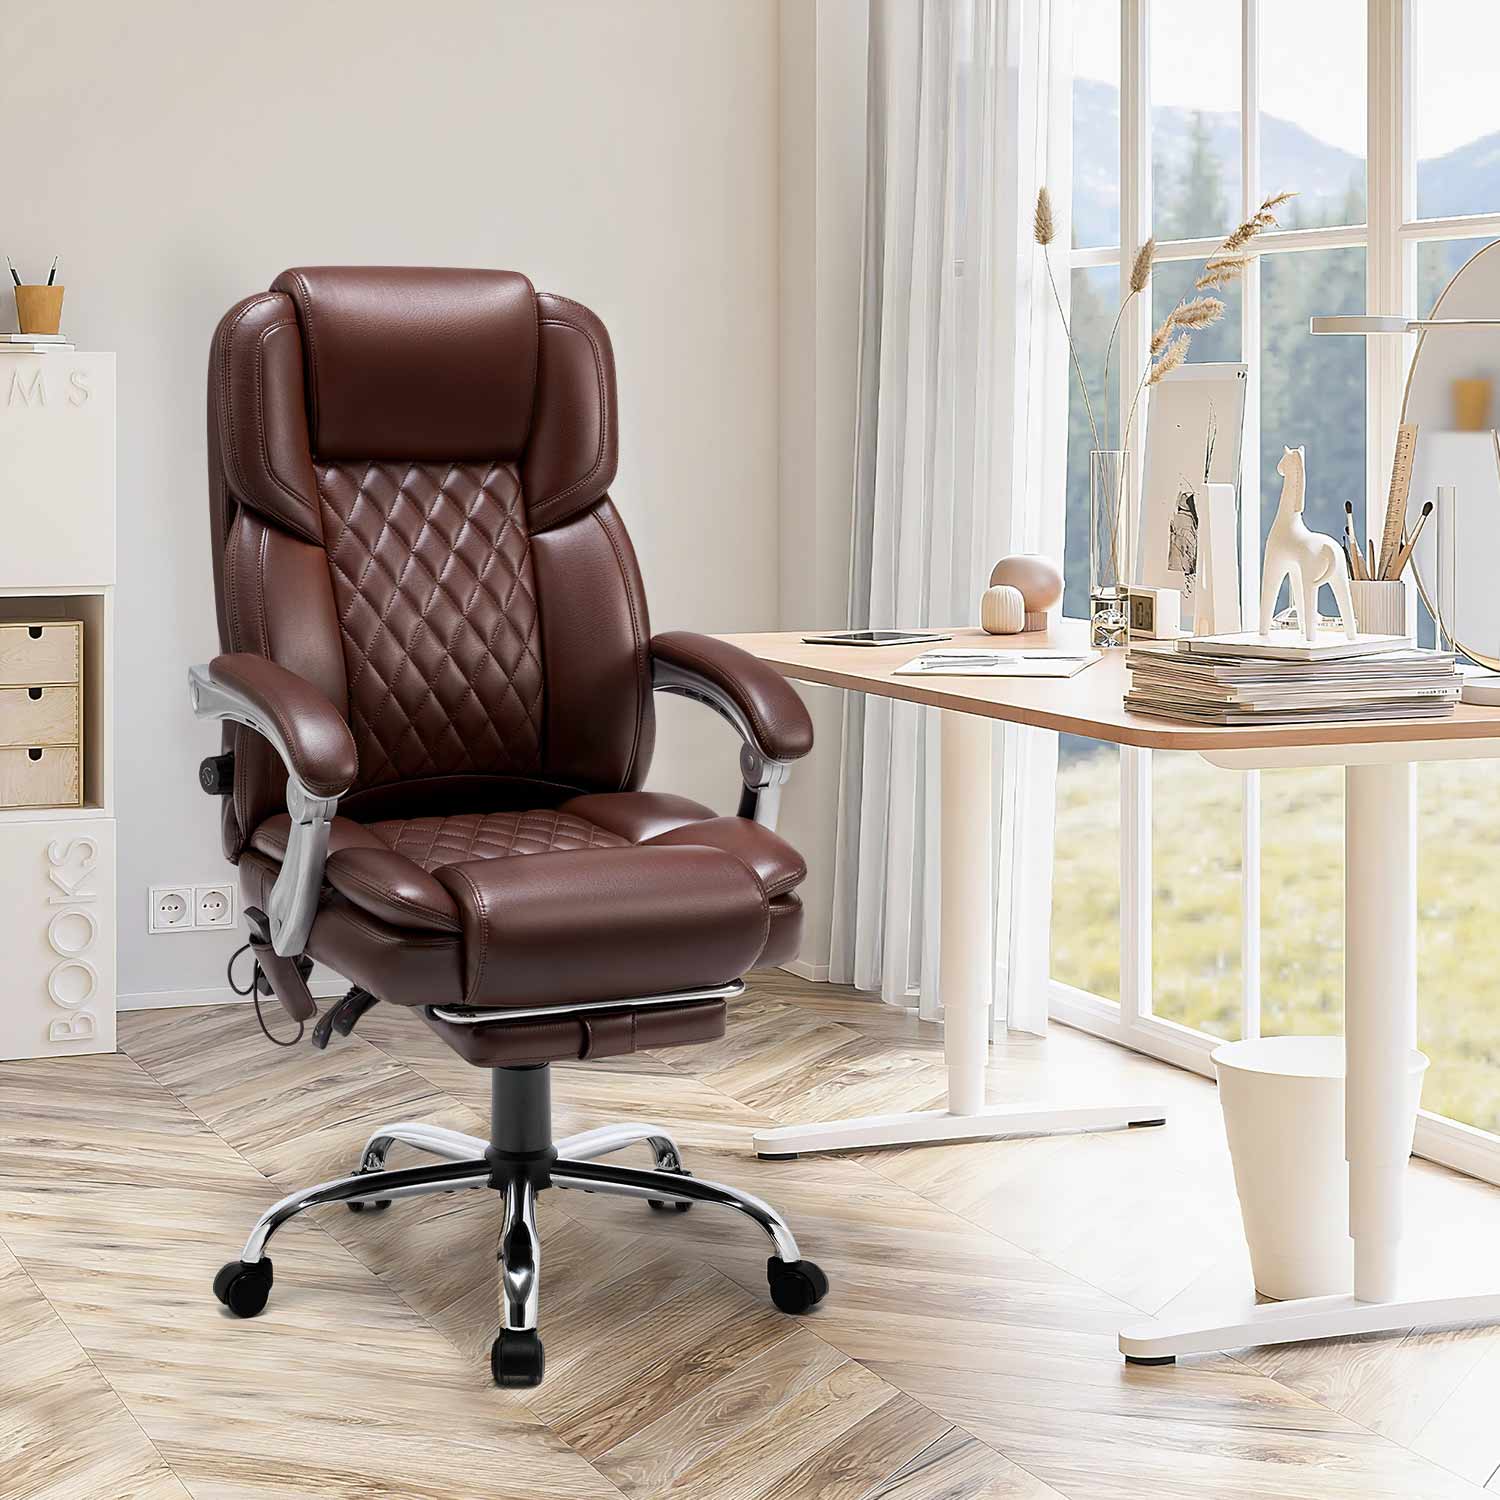 homrest-executive-office-chair-ergonomic-desk-chair-big-and-tall-massage-and-heated-for-home-brown